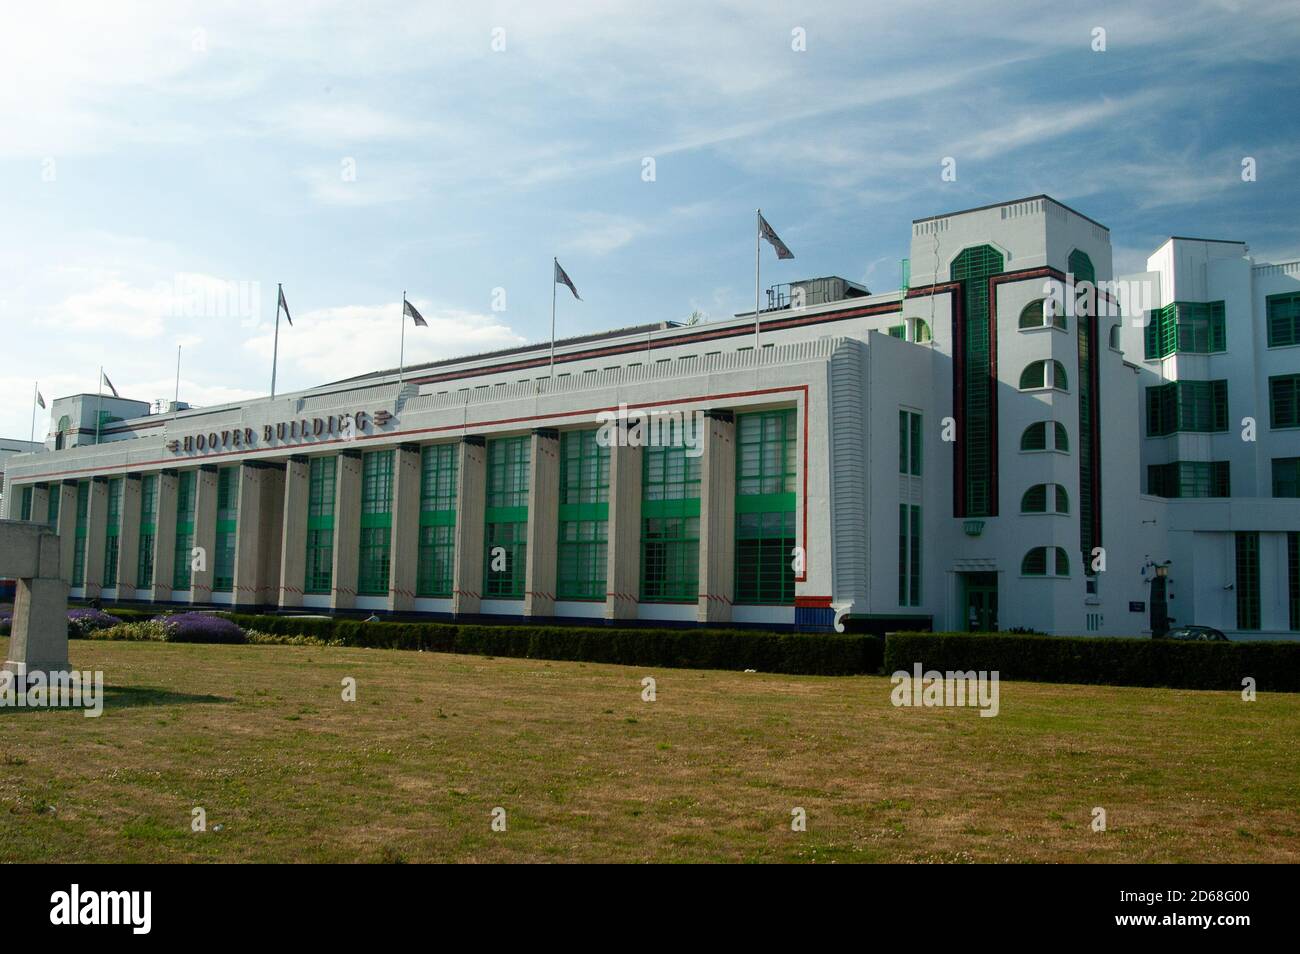 The Art Deco Hoover Building, Perivale, London, England. Stock Photo